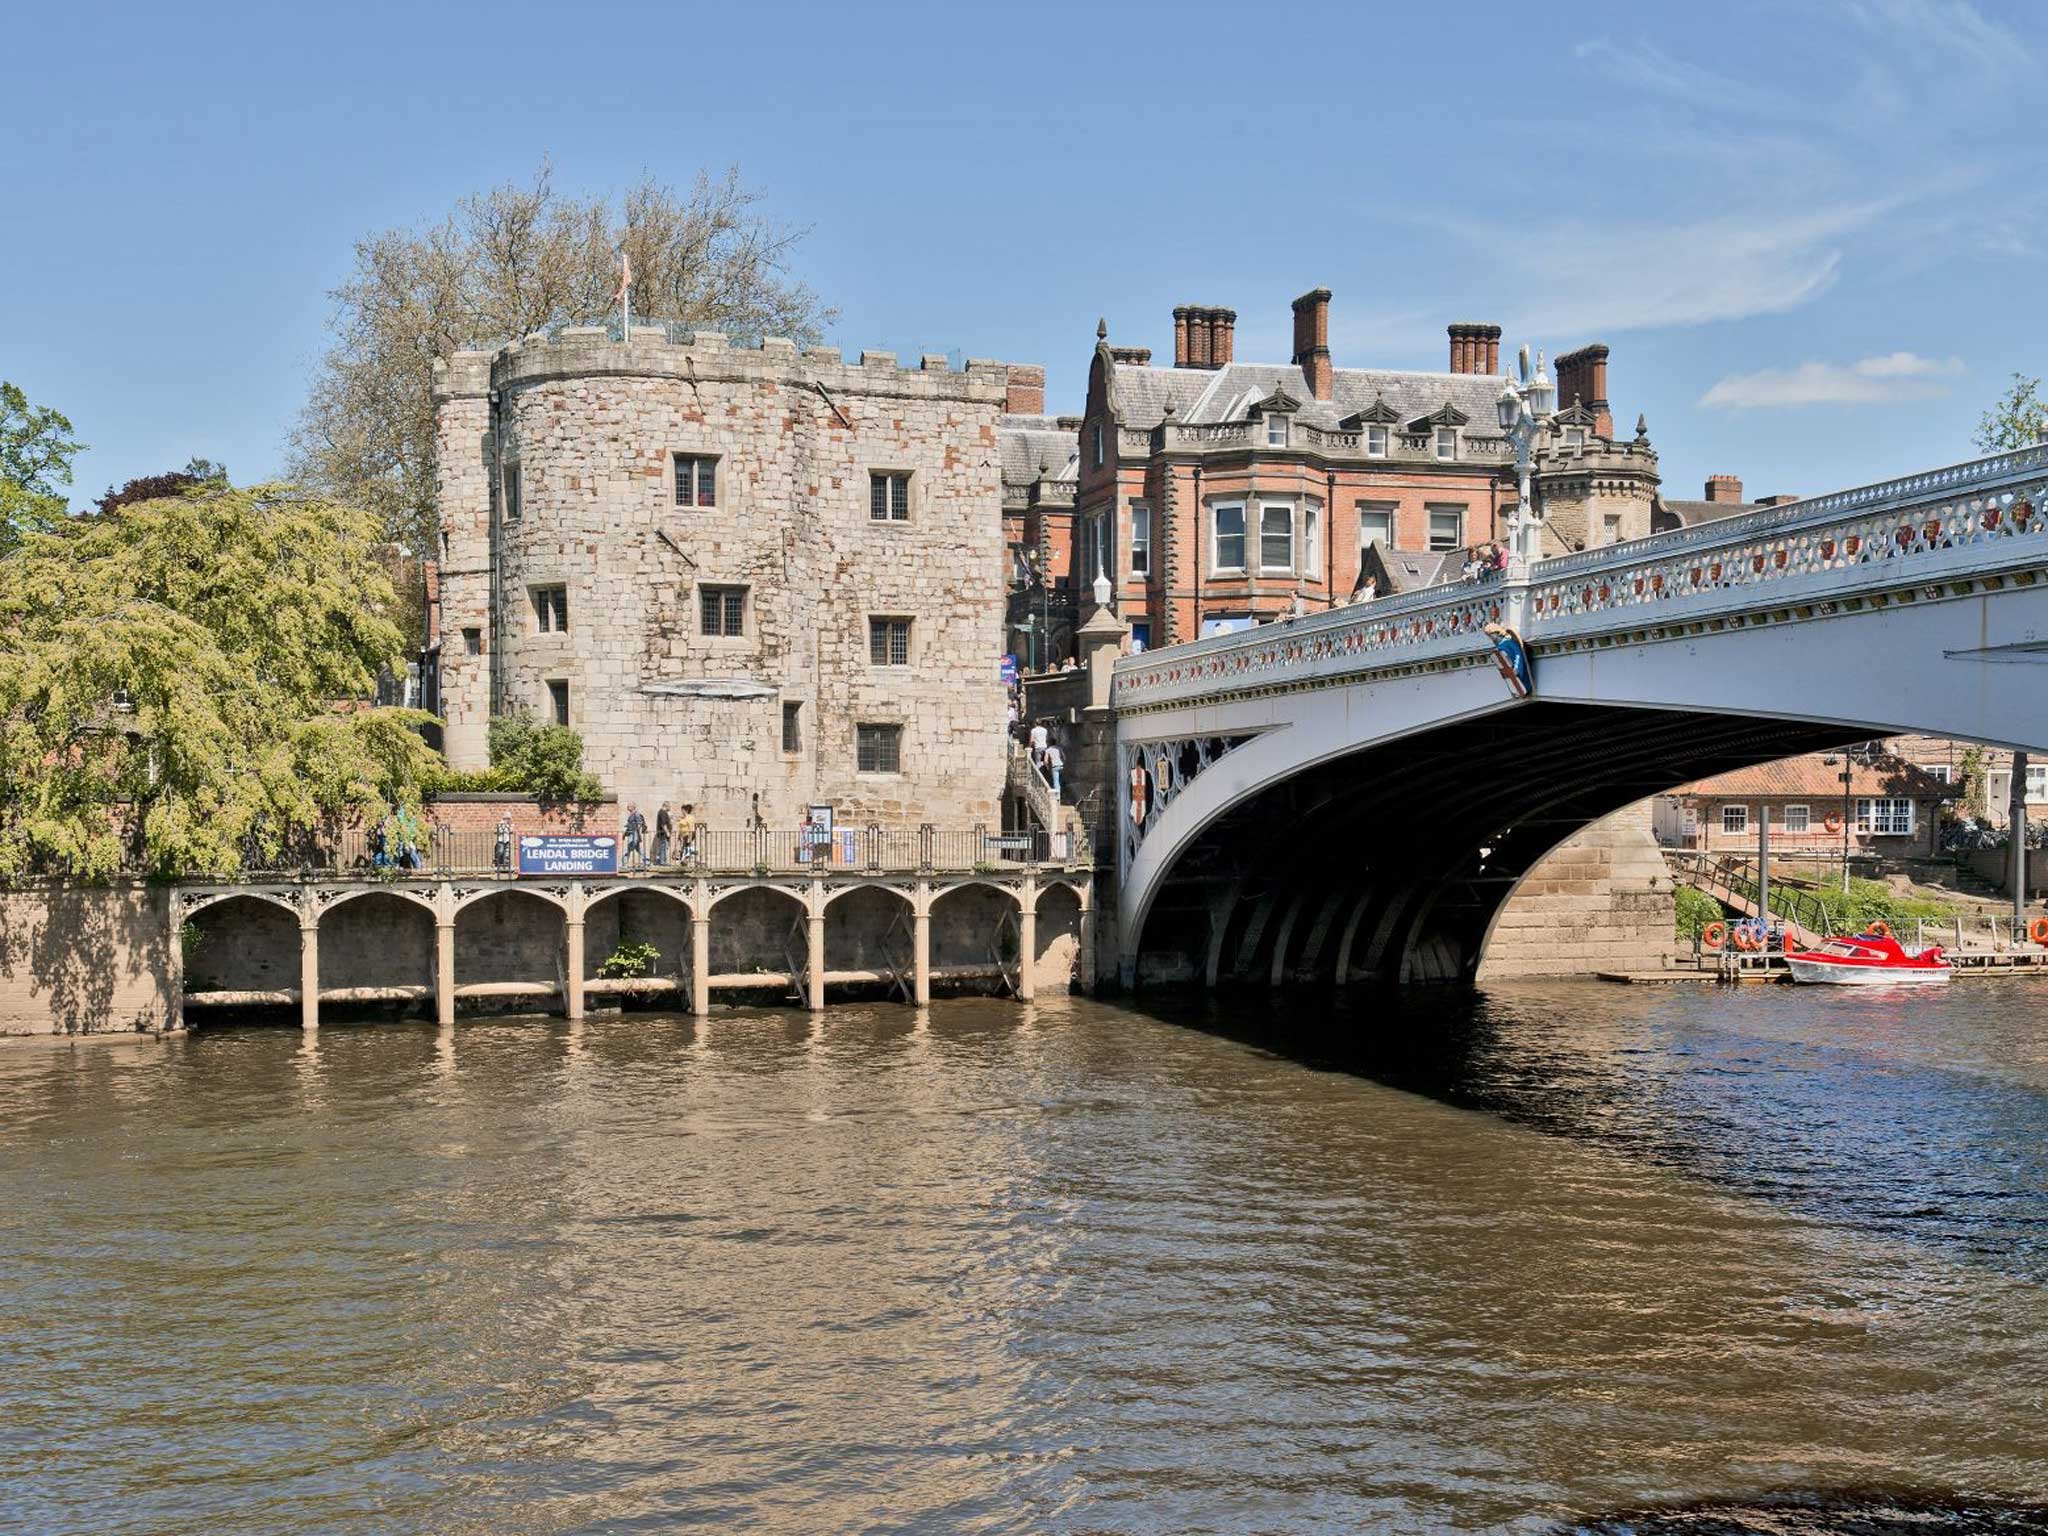 The river Ouse runs through York and is crossed by a number of bridges